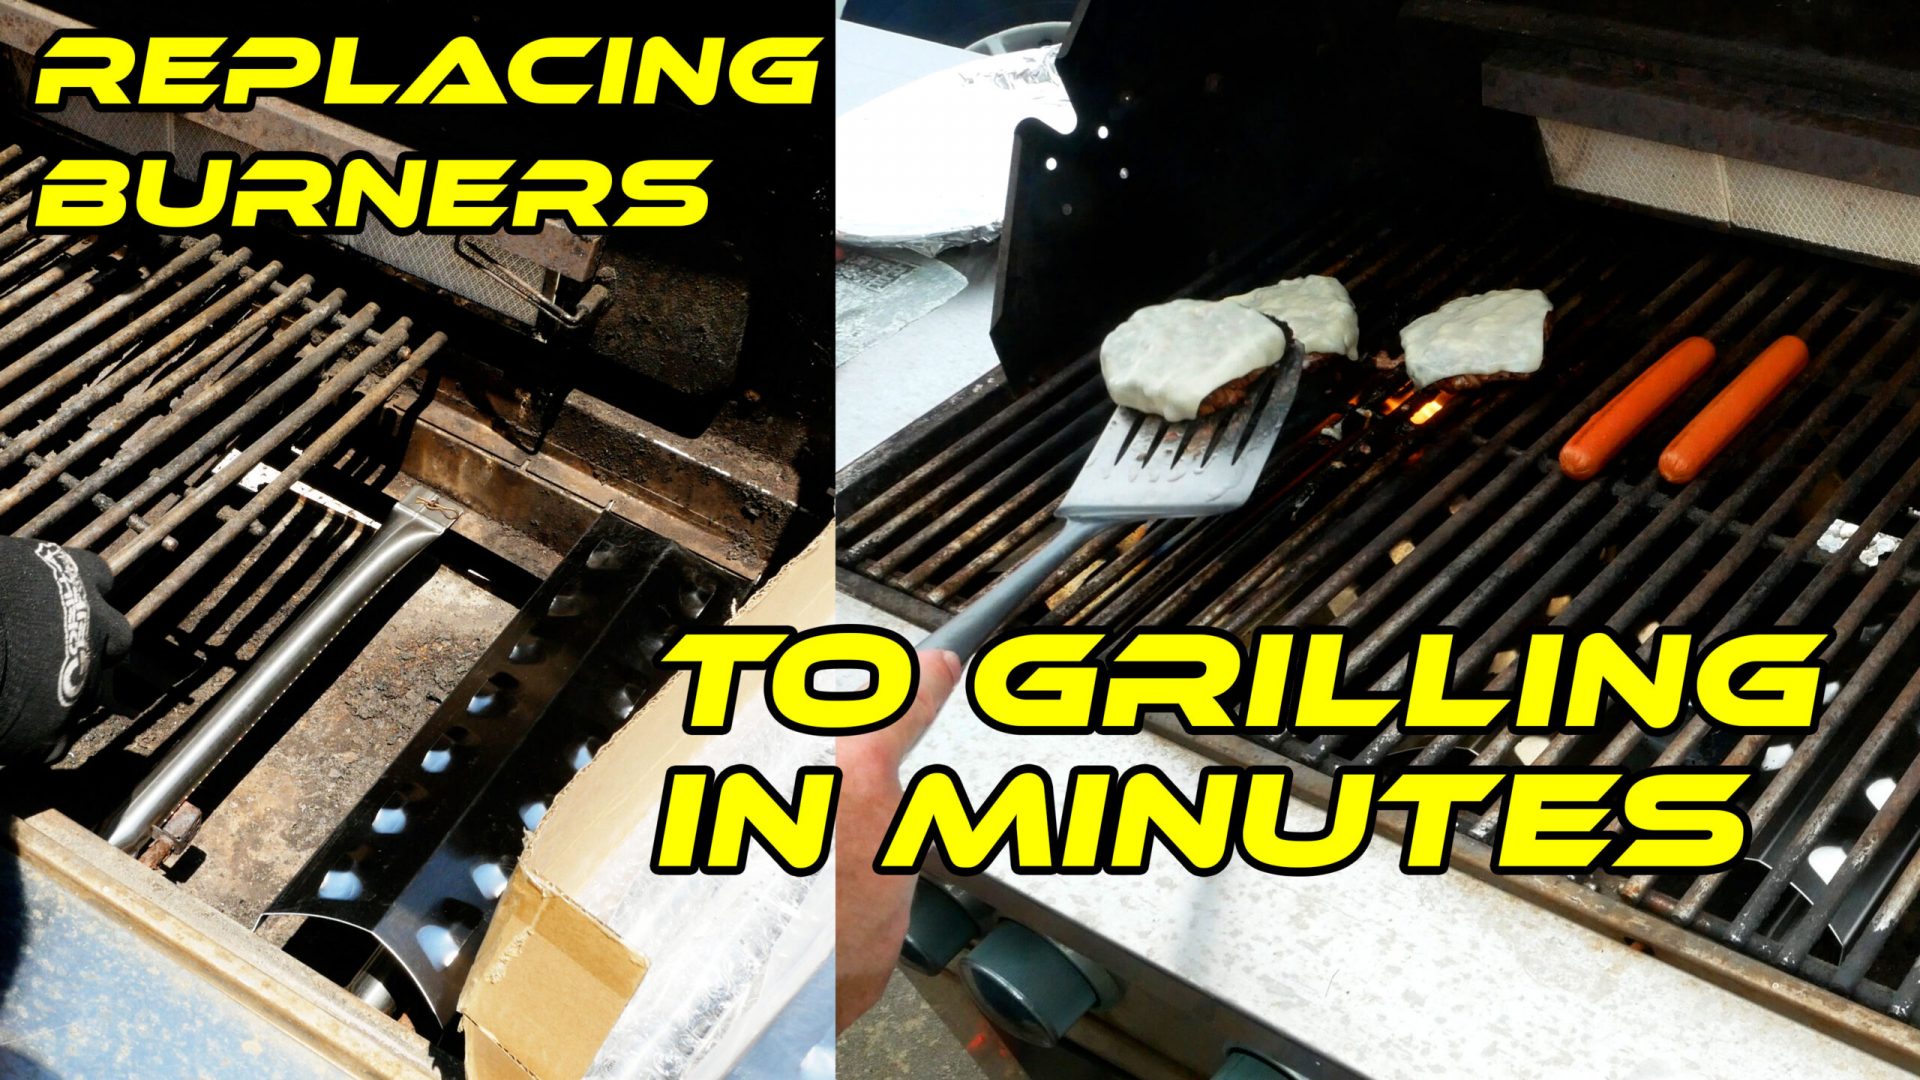 U Do It replacing burners and grilling in minutes